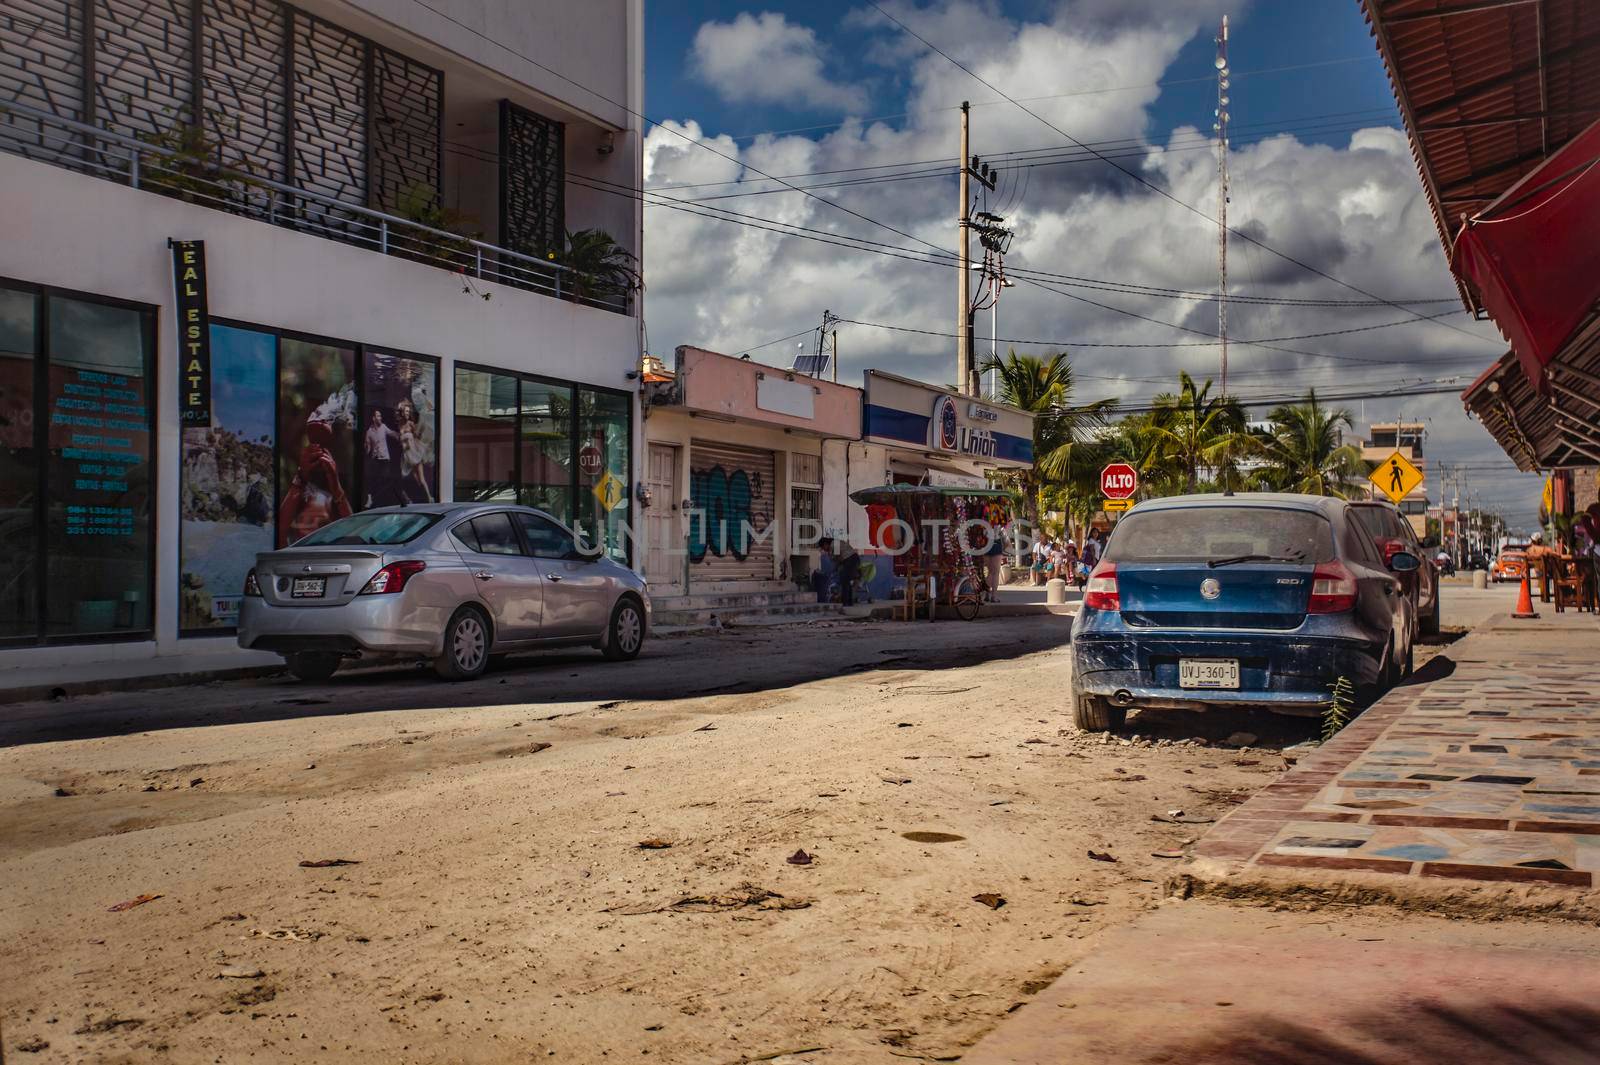 Tulum, Mexico 20 august 2022: View of a street of Tulum in Mexico with unpaved roads and some vehicles parked at the side